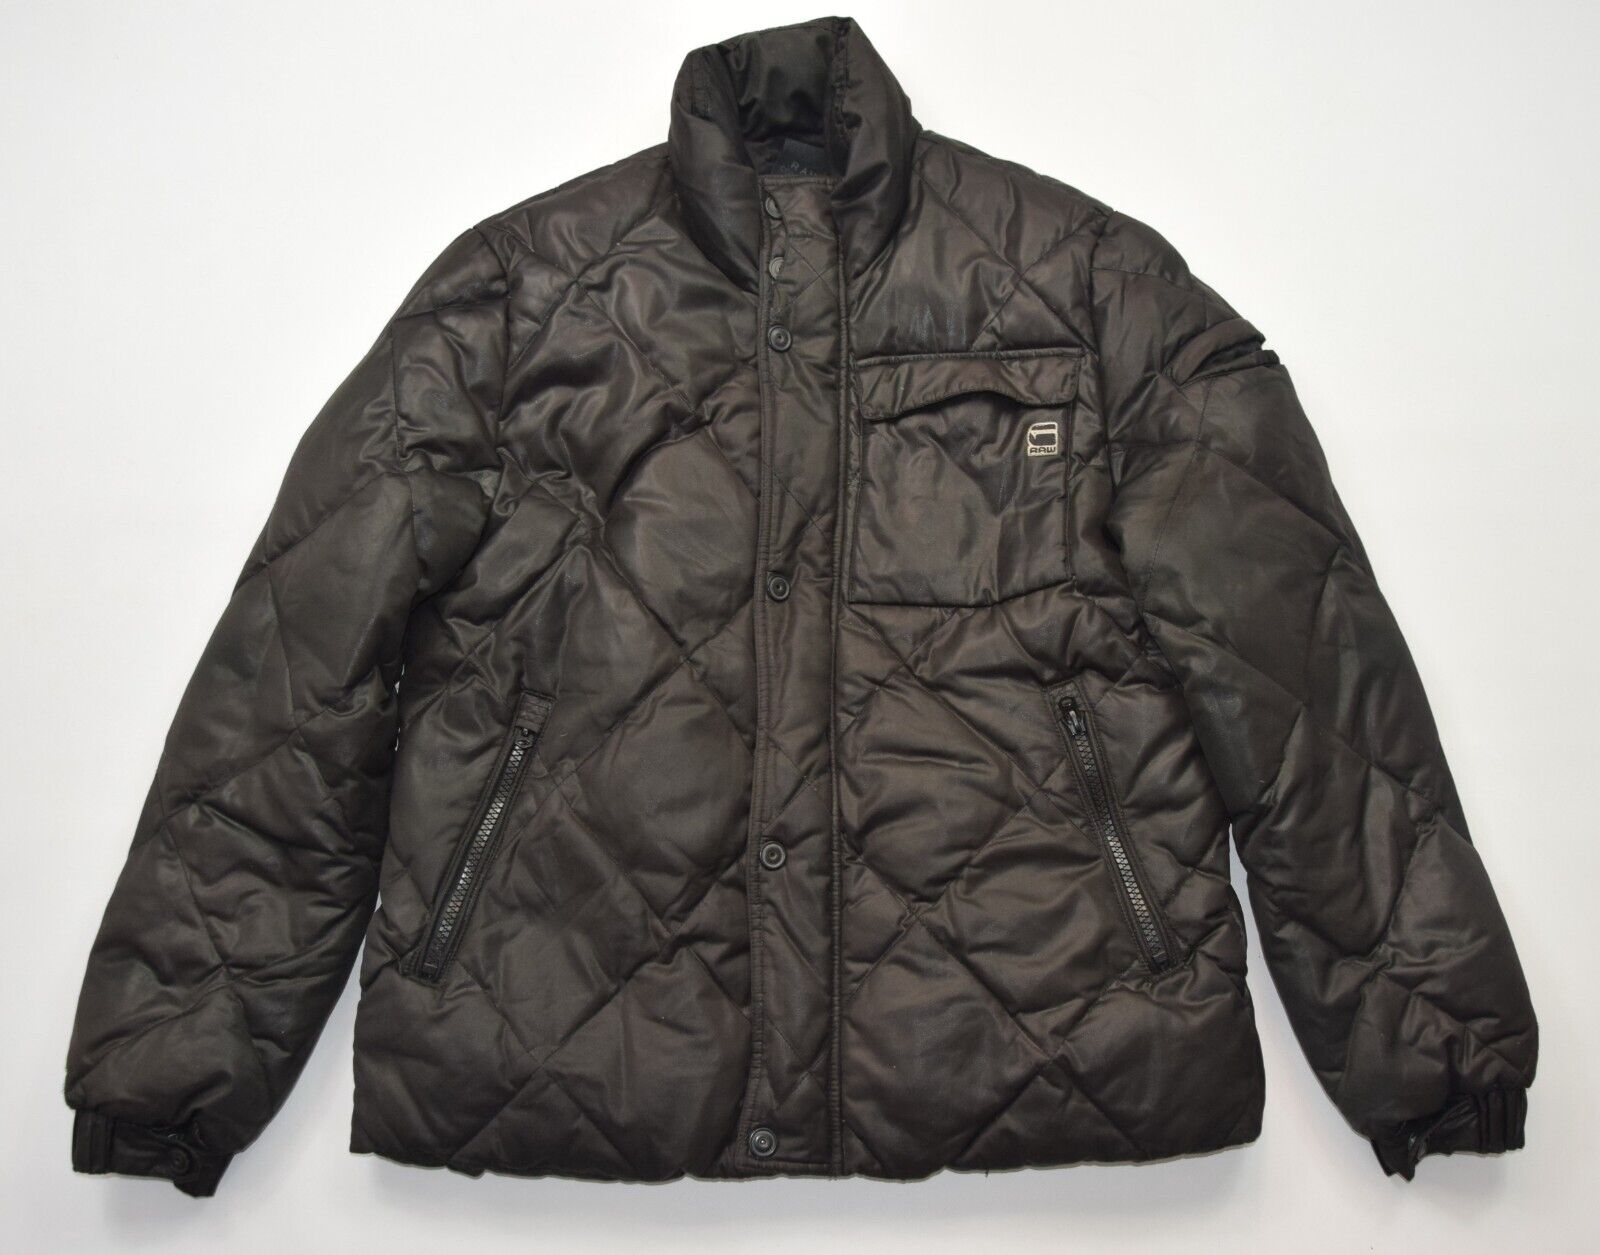 G-STAR RAW CORRECT LINE ASPEN DOWN BOMBER Jacket Mens Black Quilted size XL eBay